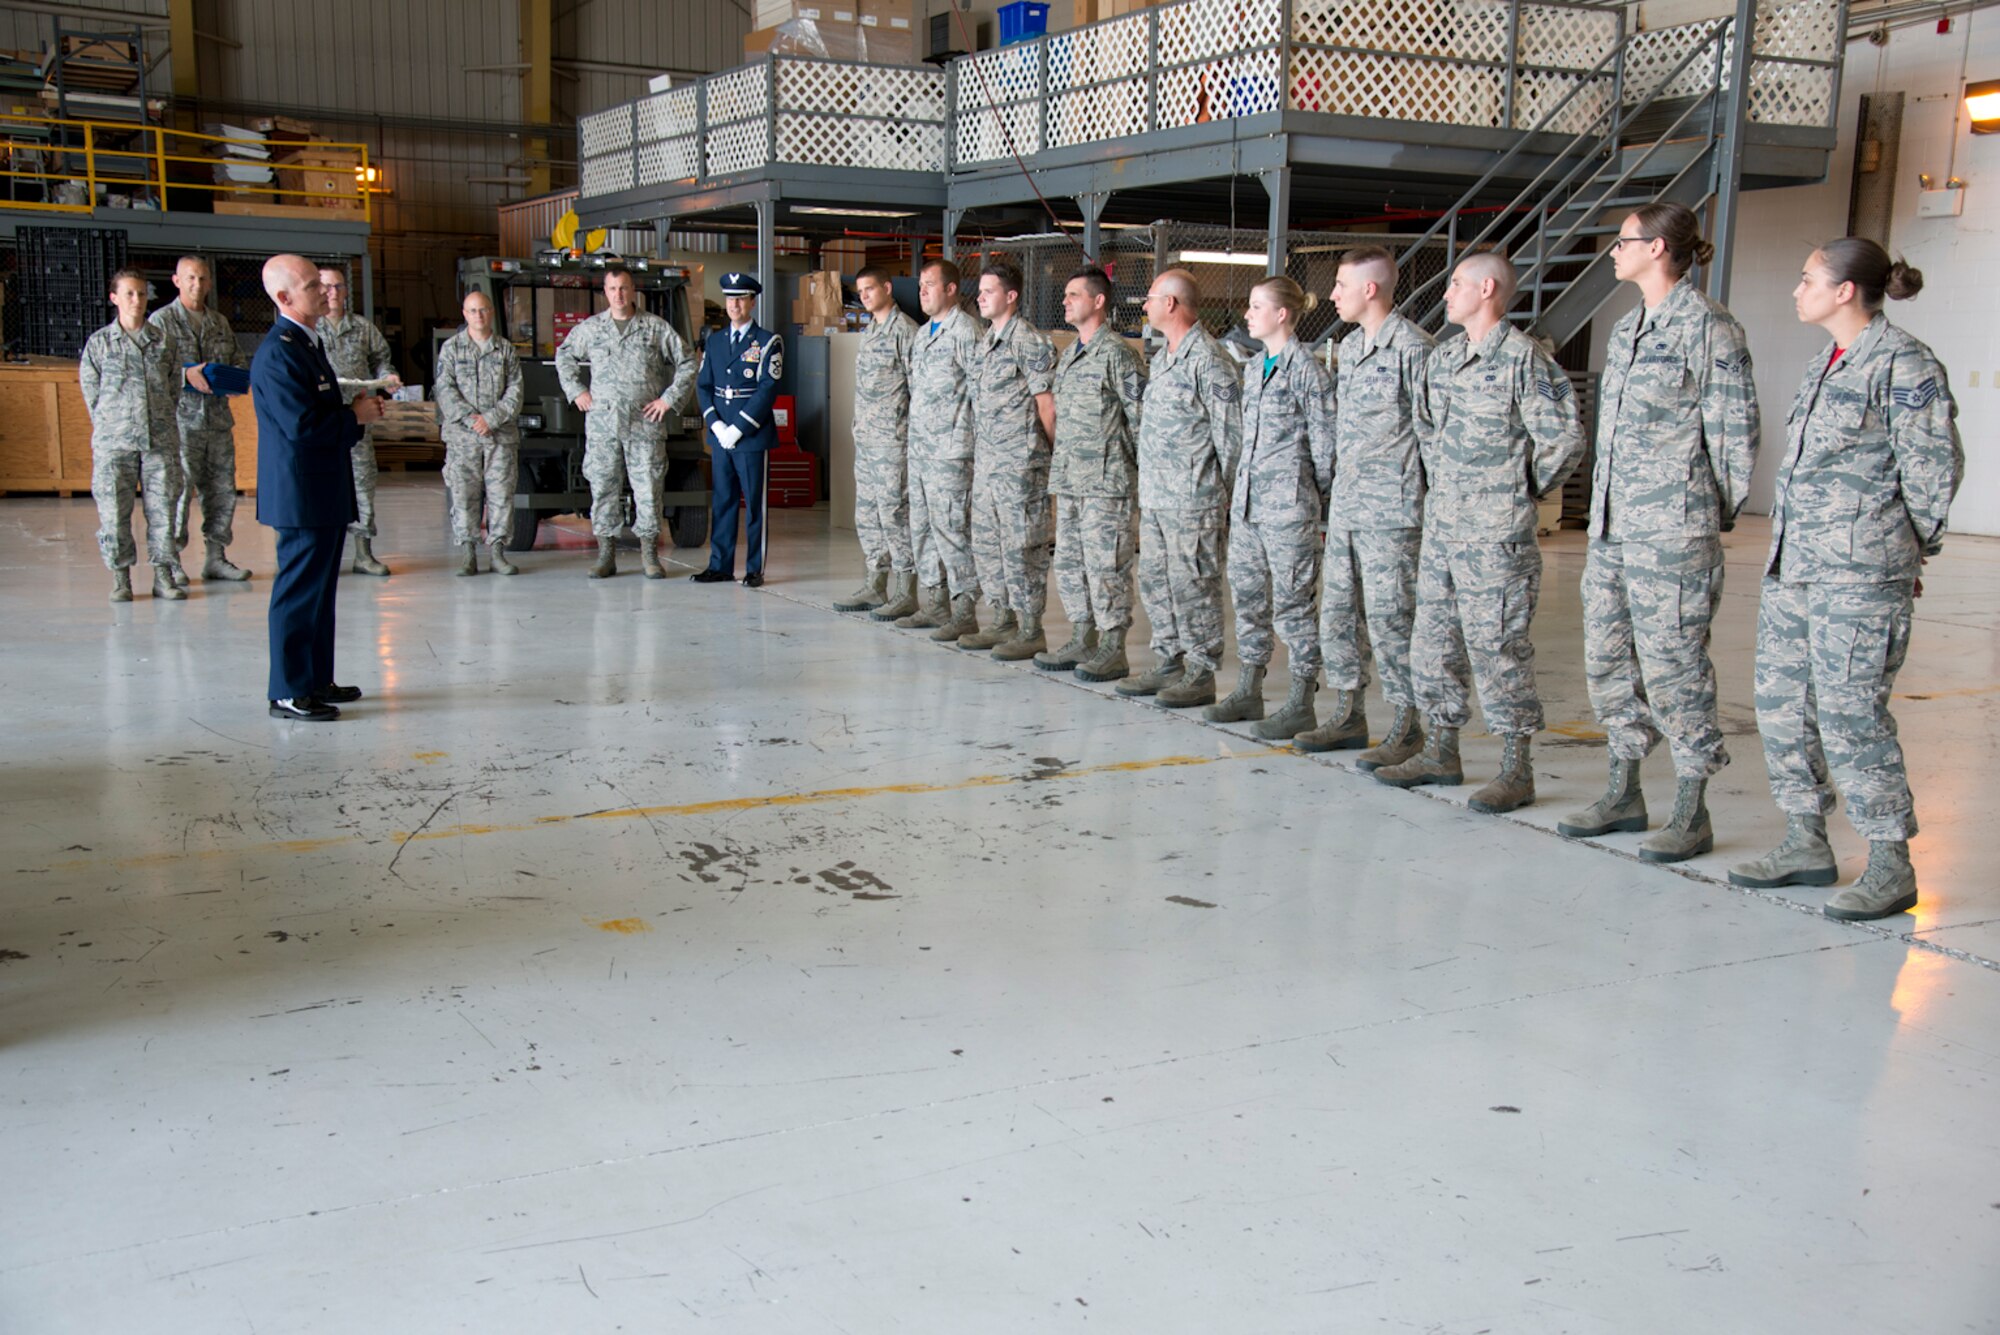 Col. Shaun Perkowski, commander of the 167th Airlift Wing, addresses newly certified Honor Guard members upon their completion of a forty-hour training course at the Martinsburg air base, July 22. (U.S. Air National Guard photo by Senior Master Sgt. Emily Beightol-Deyerle)